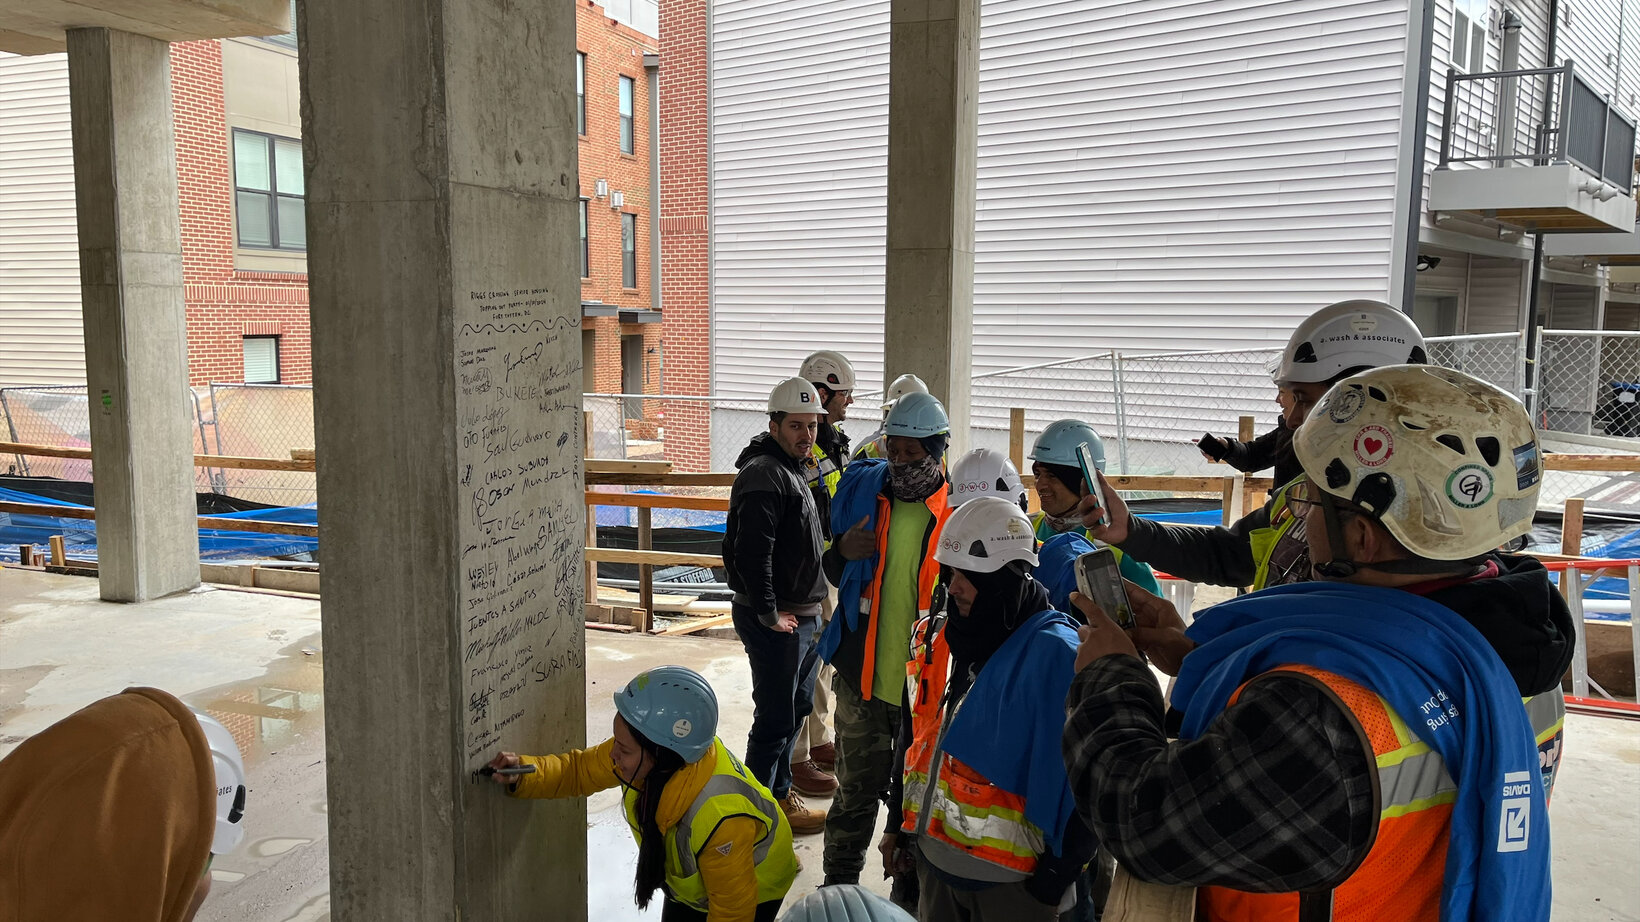 A group of people sign a pillar within a construction site, marking the construction team reaching the top of the structure.